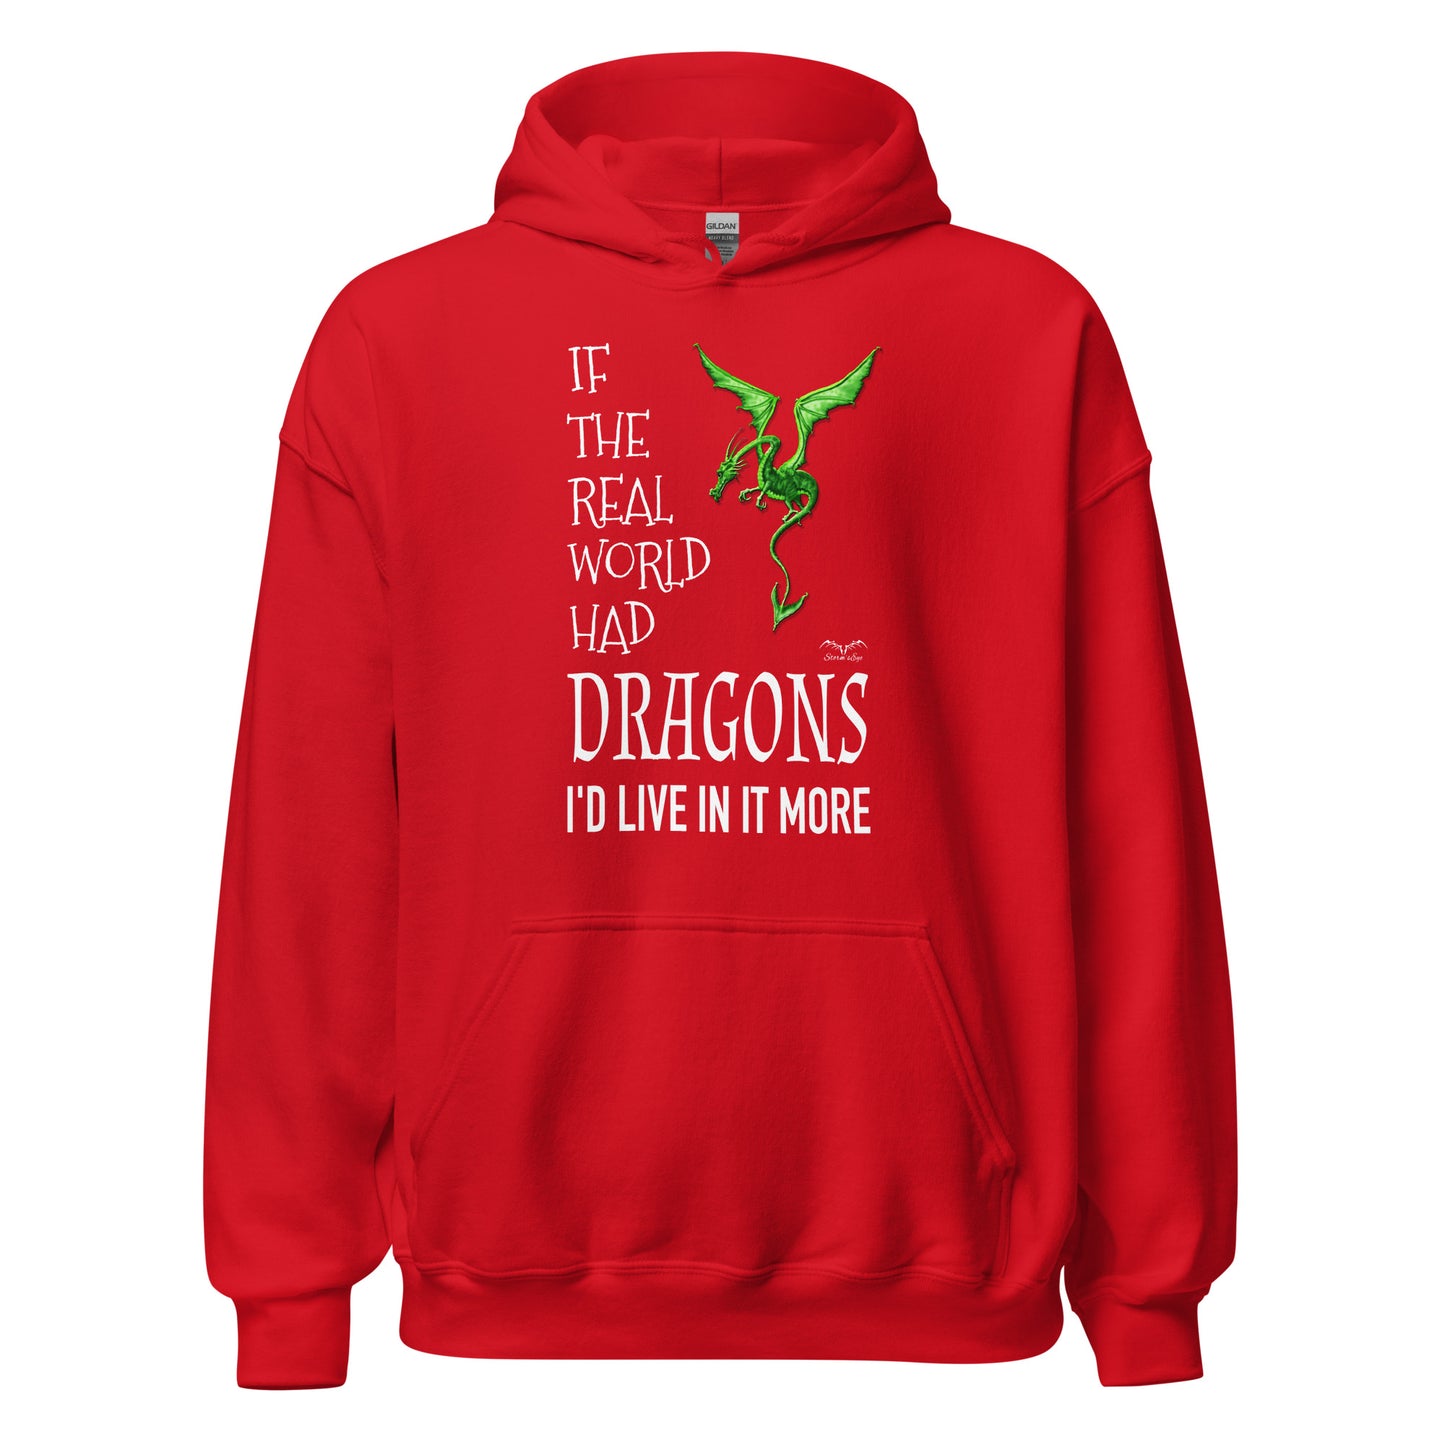 Real World dragons hoodie, bright red, by Stormseye Design